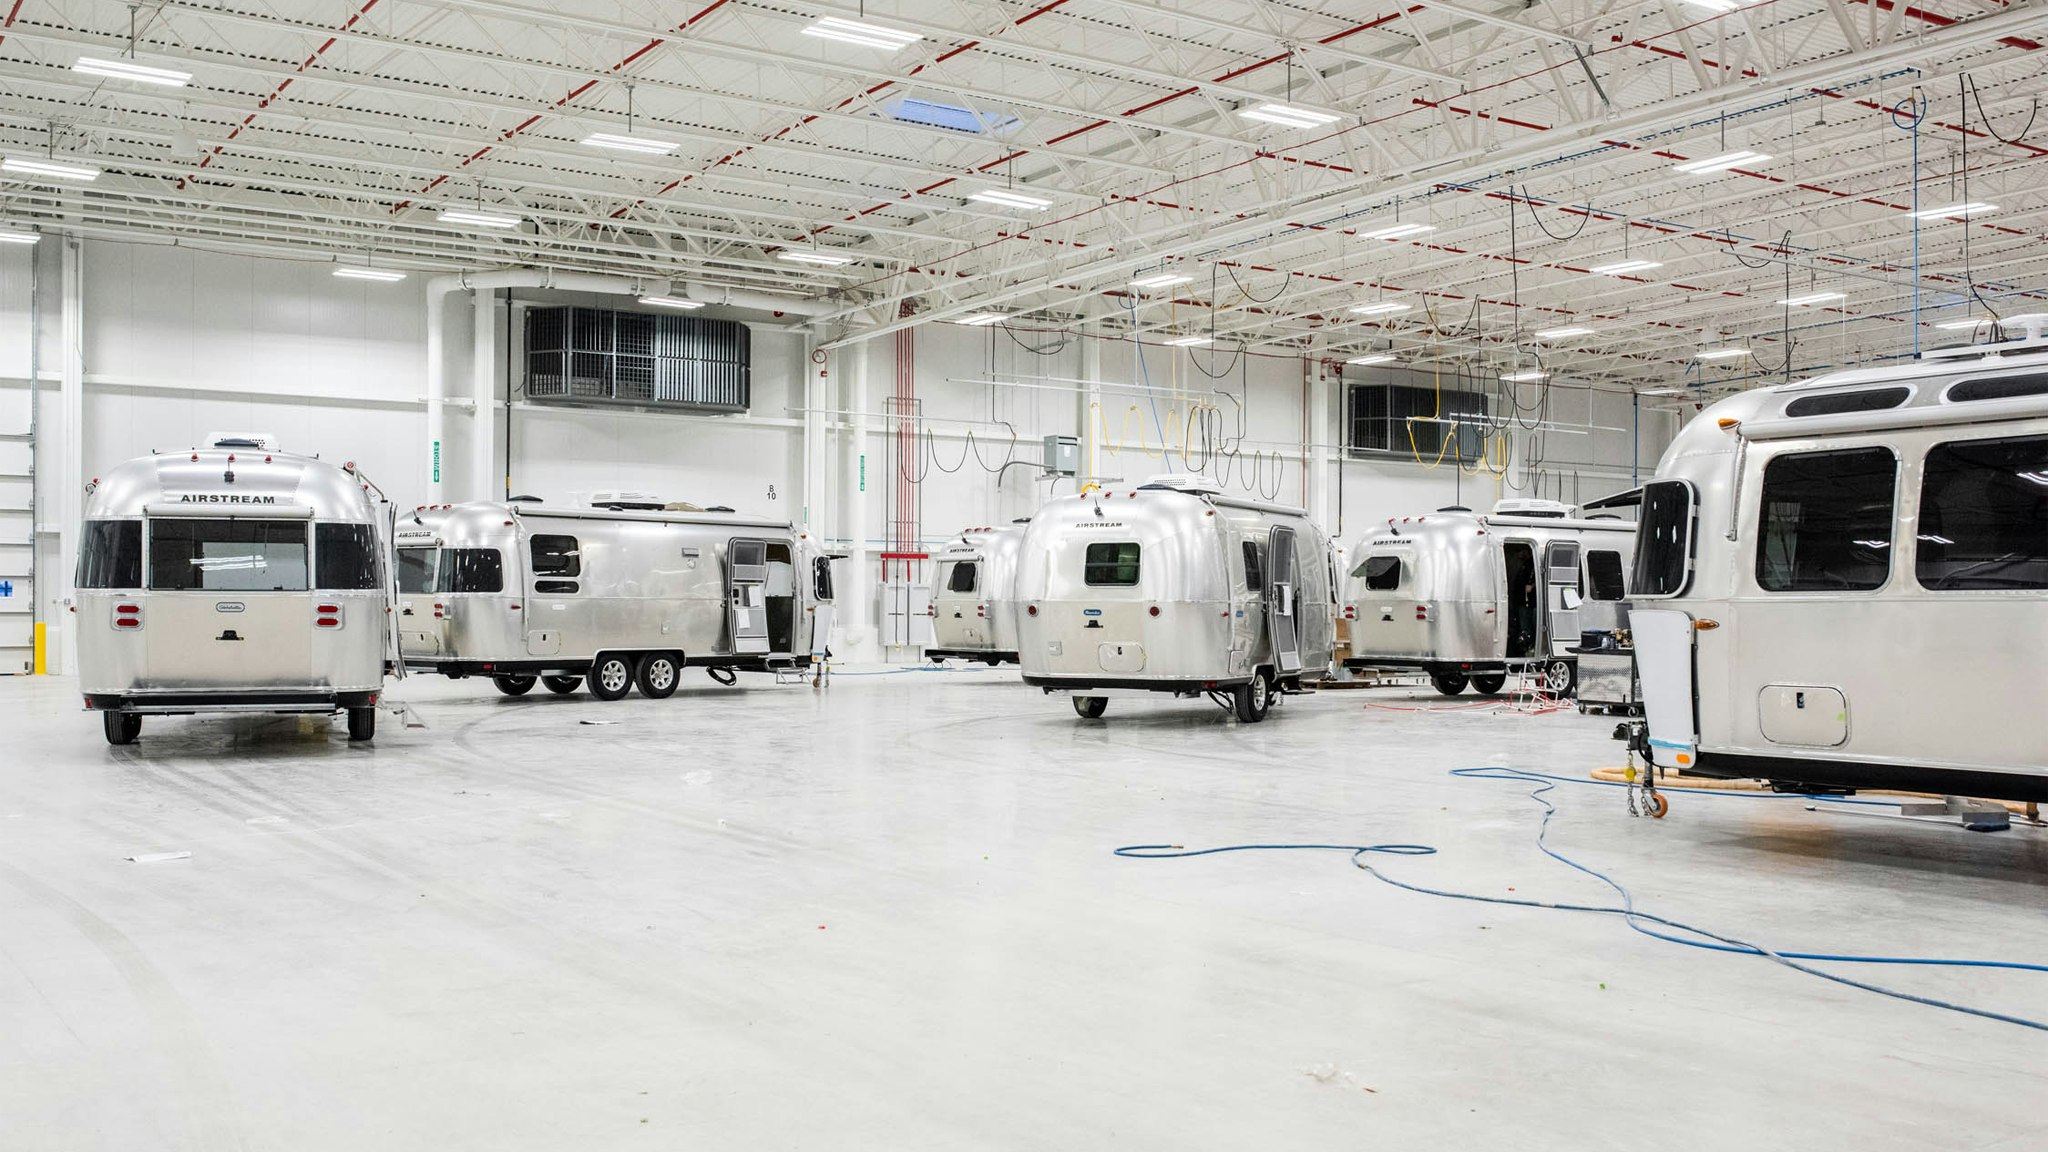 Airstream Travel Trailers being built down the line at the Airstream Production Facility in Jackson Center, Ohio.